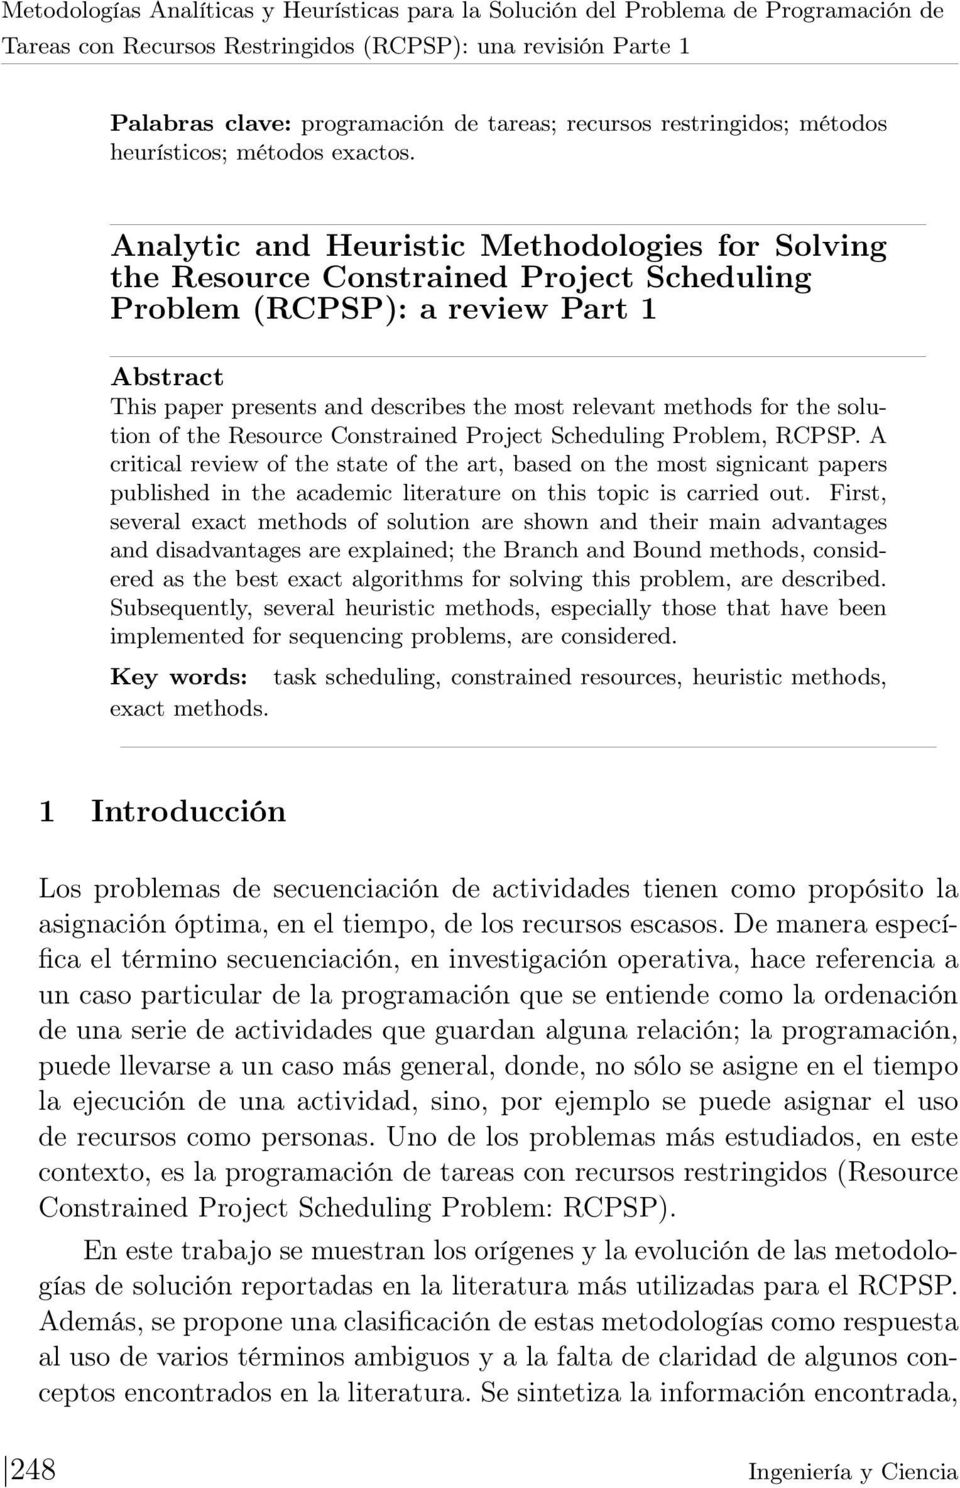 Analytic and Heuristic Methodologies for Solving the Resource Constrained Project Scheduling Problem (RCPSP): a review Part 1 Abstract This paper presents and describes the most relevant methods for